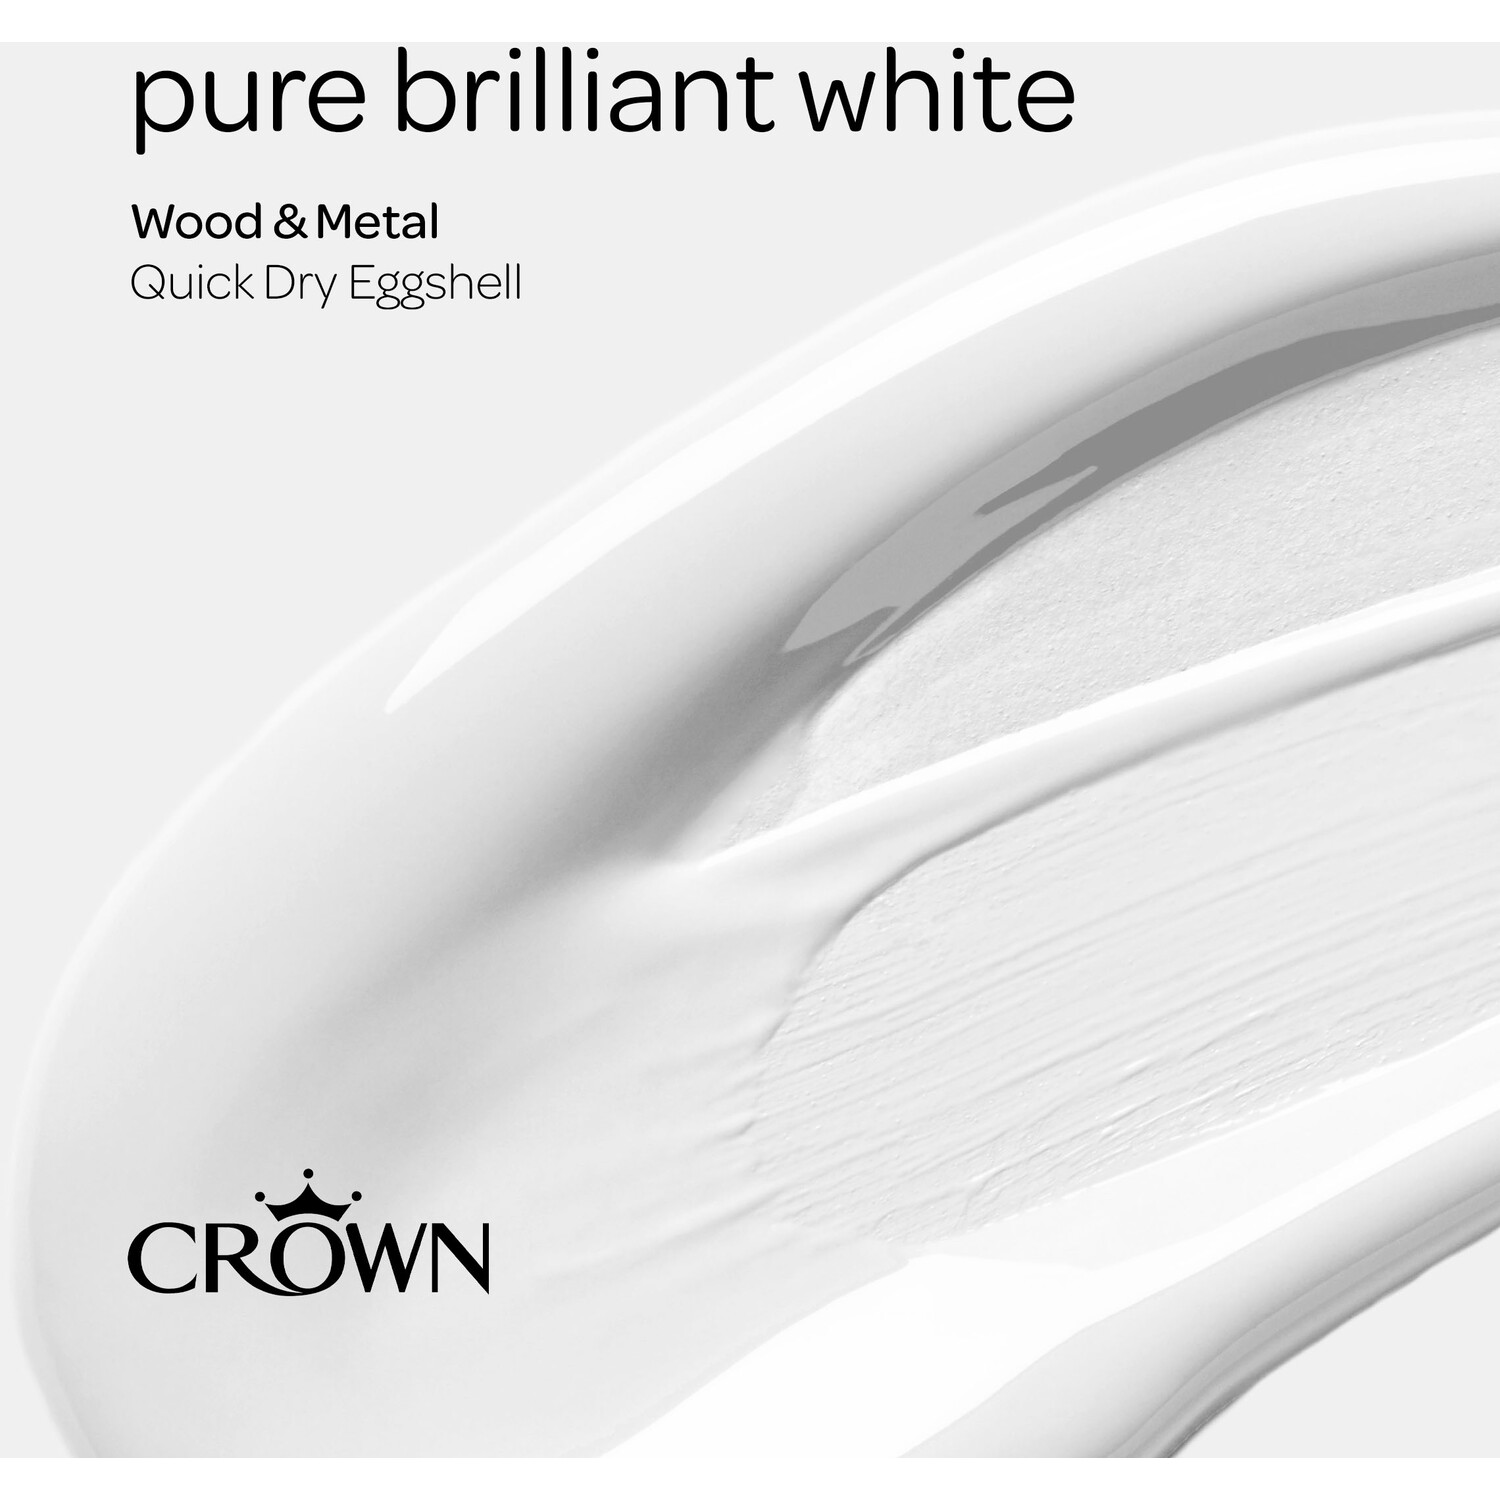 Crown Quick Dry Wood and Metal Pure Brilliant White Eggshell Paint 750ml Image 4